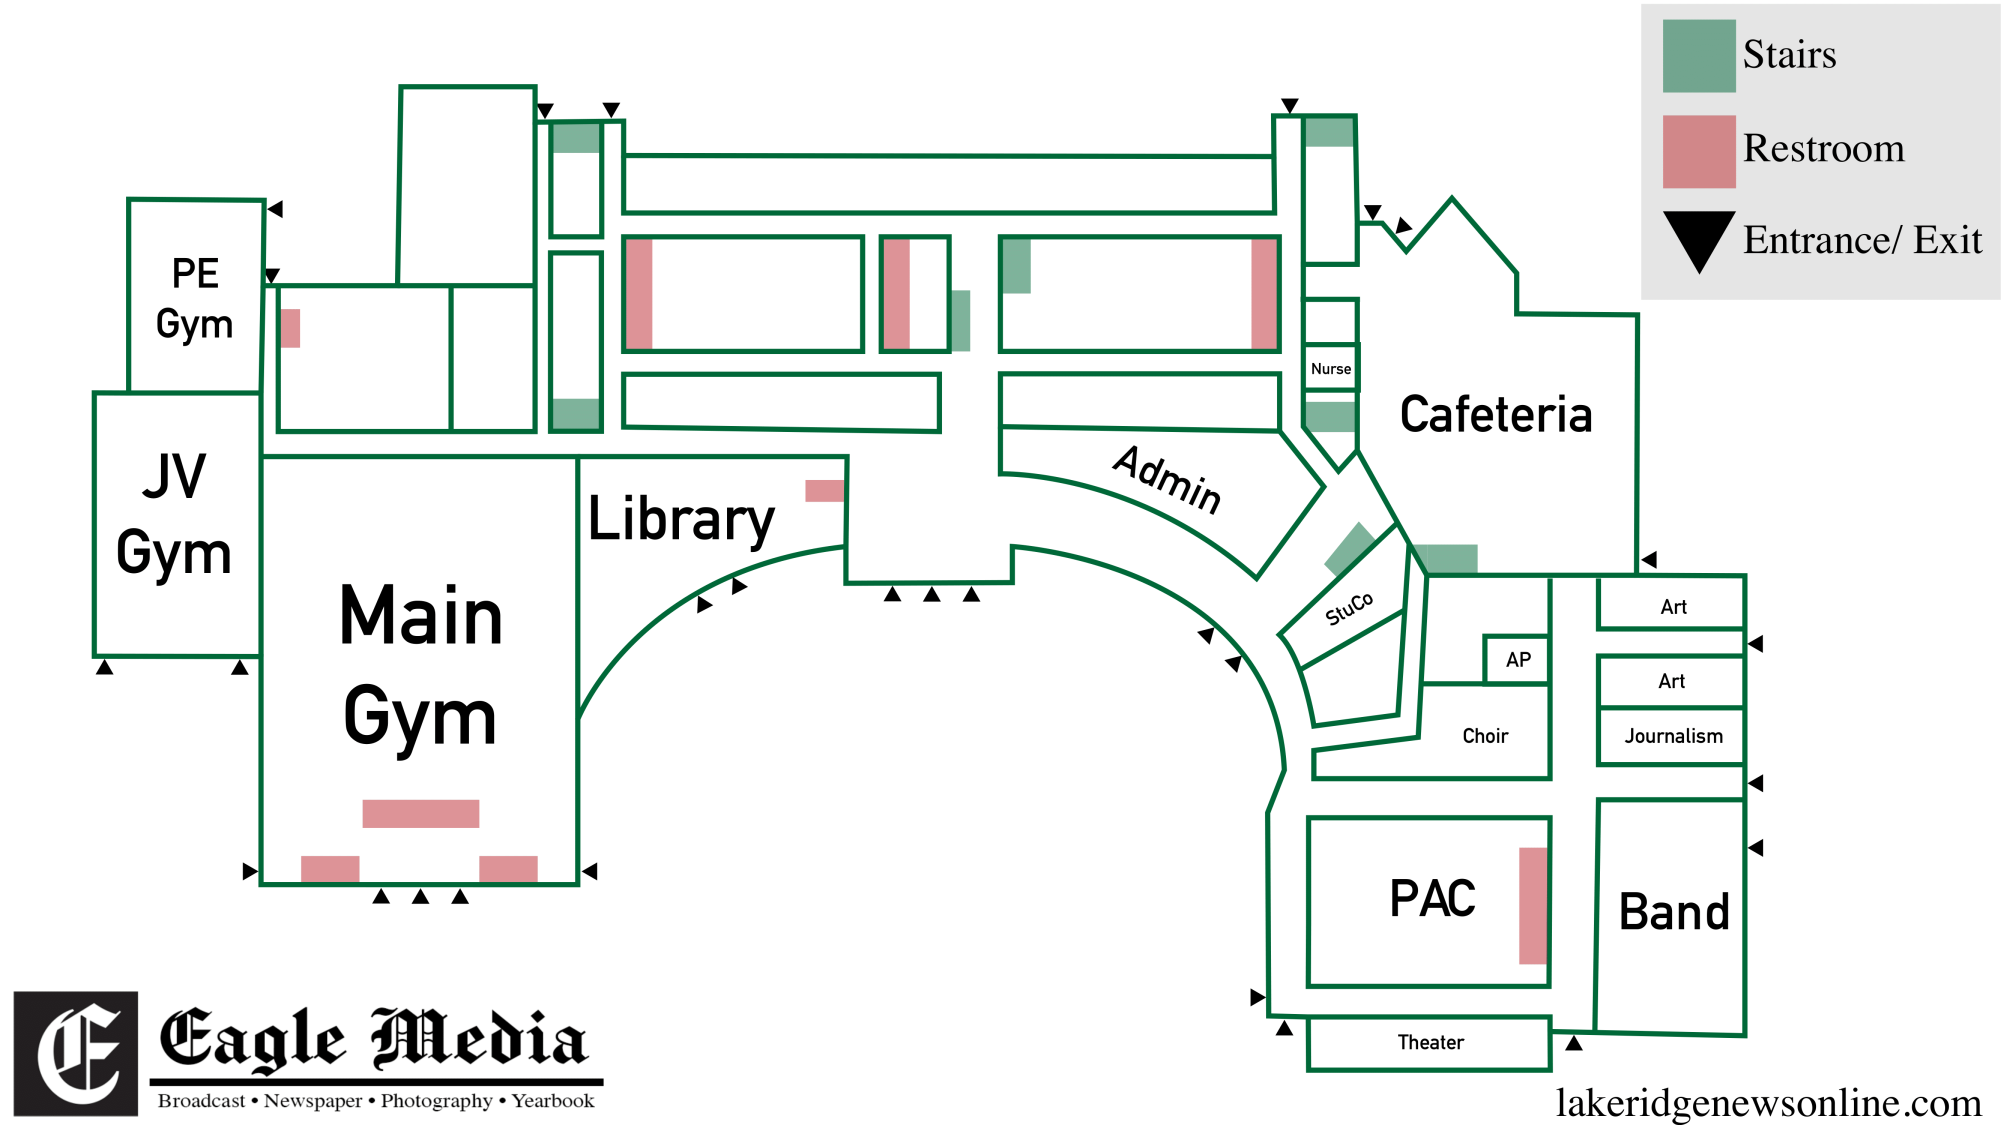 The first floor of Mansfield Lake Ridge High School comes to life through its detailed map, serving as a guiding companion for students, staff, and visitors alike. The left side of the map highlights the energetic heart of the school, showcasing the gymnasiums used for physical education classes, practices, and the school's spirited Eagle's games. Adjacent to these dynamic spaces, the library forms a central axis between the main entrance and the gym entrance, offering a serene haven for intellectual exploration. Moving to the central area of the map, a mosaic of classroom blocks unfolds, depicting the diverse array of learning spaces where knowledge flourishes. Within this bustling educational hub, essential facilities such as restrooms, marked in vivid red, and easily accessible staircases, indicated in soft green, are thoughtfully incorporated. This main corridor, aptly known as "A-hall," serves as the central artery connecting various wings of the school. On the right side of the map, a dedicated block houses administrative offices, functioning as the nerve center of the school's operations. Here, counselors and principals work collaboratively to provide guidance and maintain the school's seamless functioning. Adjacent to the administrative block, the map ventures into what is affectionately referred to as "E-hall." This vibrant corner of the school hosts an array of fine arts activities, ranging from Band and Choir to Art and Journalism. E-hall, seamlessly linked to the main building via the Cafeteria, stands as a testament to the school's commitment to holistic education. The map ingeniously employs symbols, like the black triangles that indicate various entrances, to facilitate easy navigation throughout the sprawling campus. Altogether, this intricately designed map provides a holistic representation of the first-floor layout of Mansfield Lake Ridge High School, encapsulating the energy, diversity, and interconnectedness that define this educational haven.